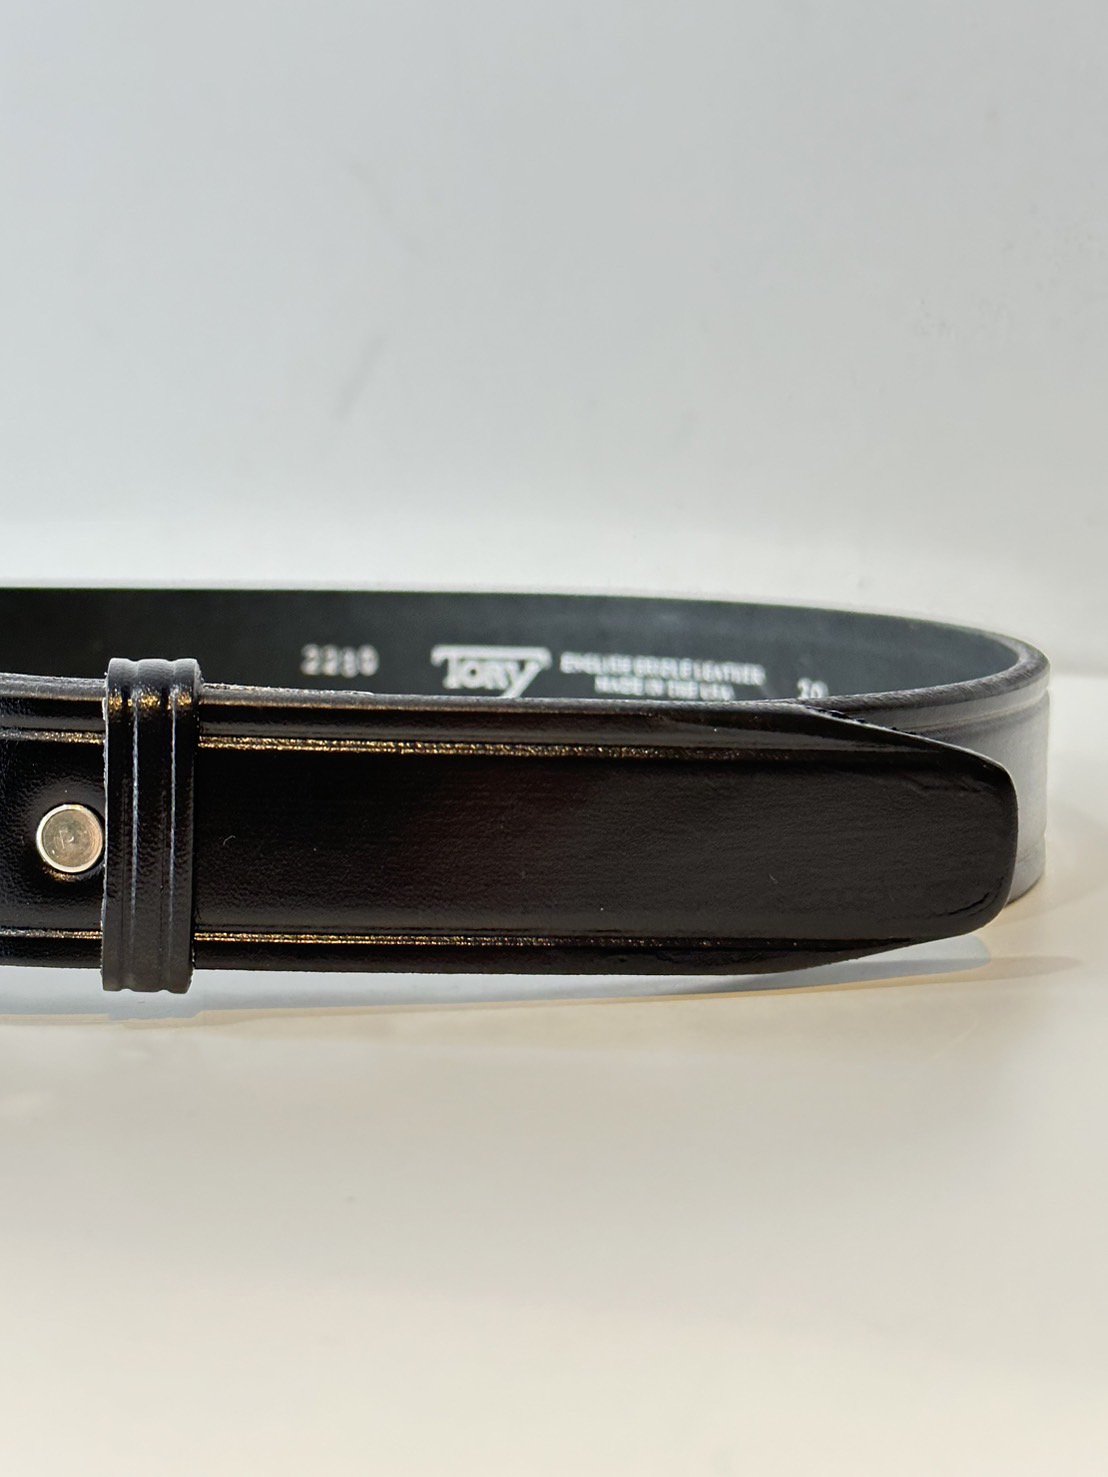 TORY LEATHER<br />HOOF PICK BELT / BLACKNICKEL<img class='new_mark_img2' src='https://img.shop-pro.jp/img/new/icons47.gif' style='border:none;display:inline;margin:0px;padding:0px;width:auto;' />